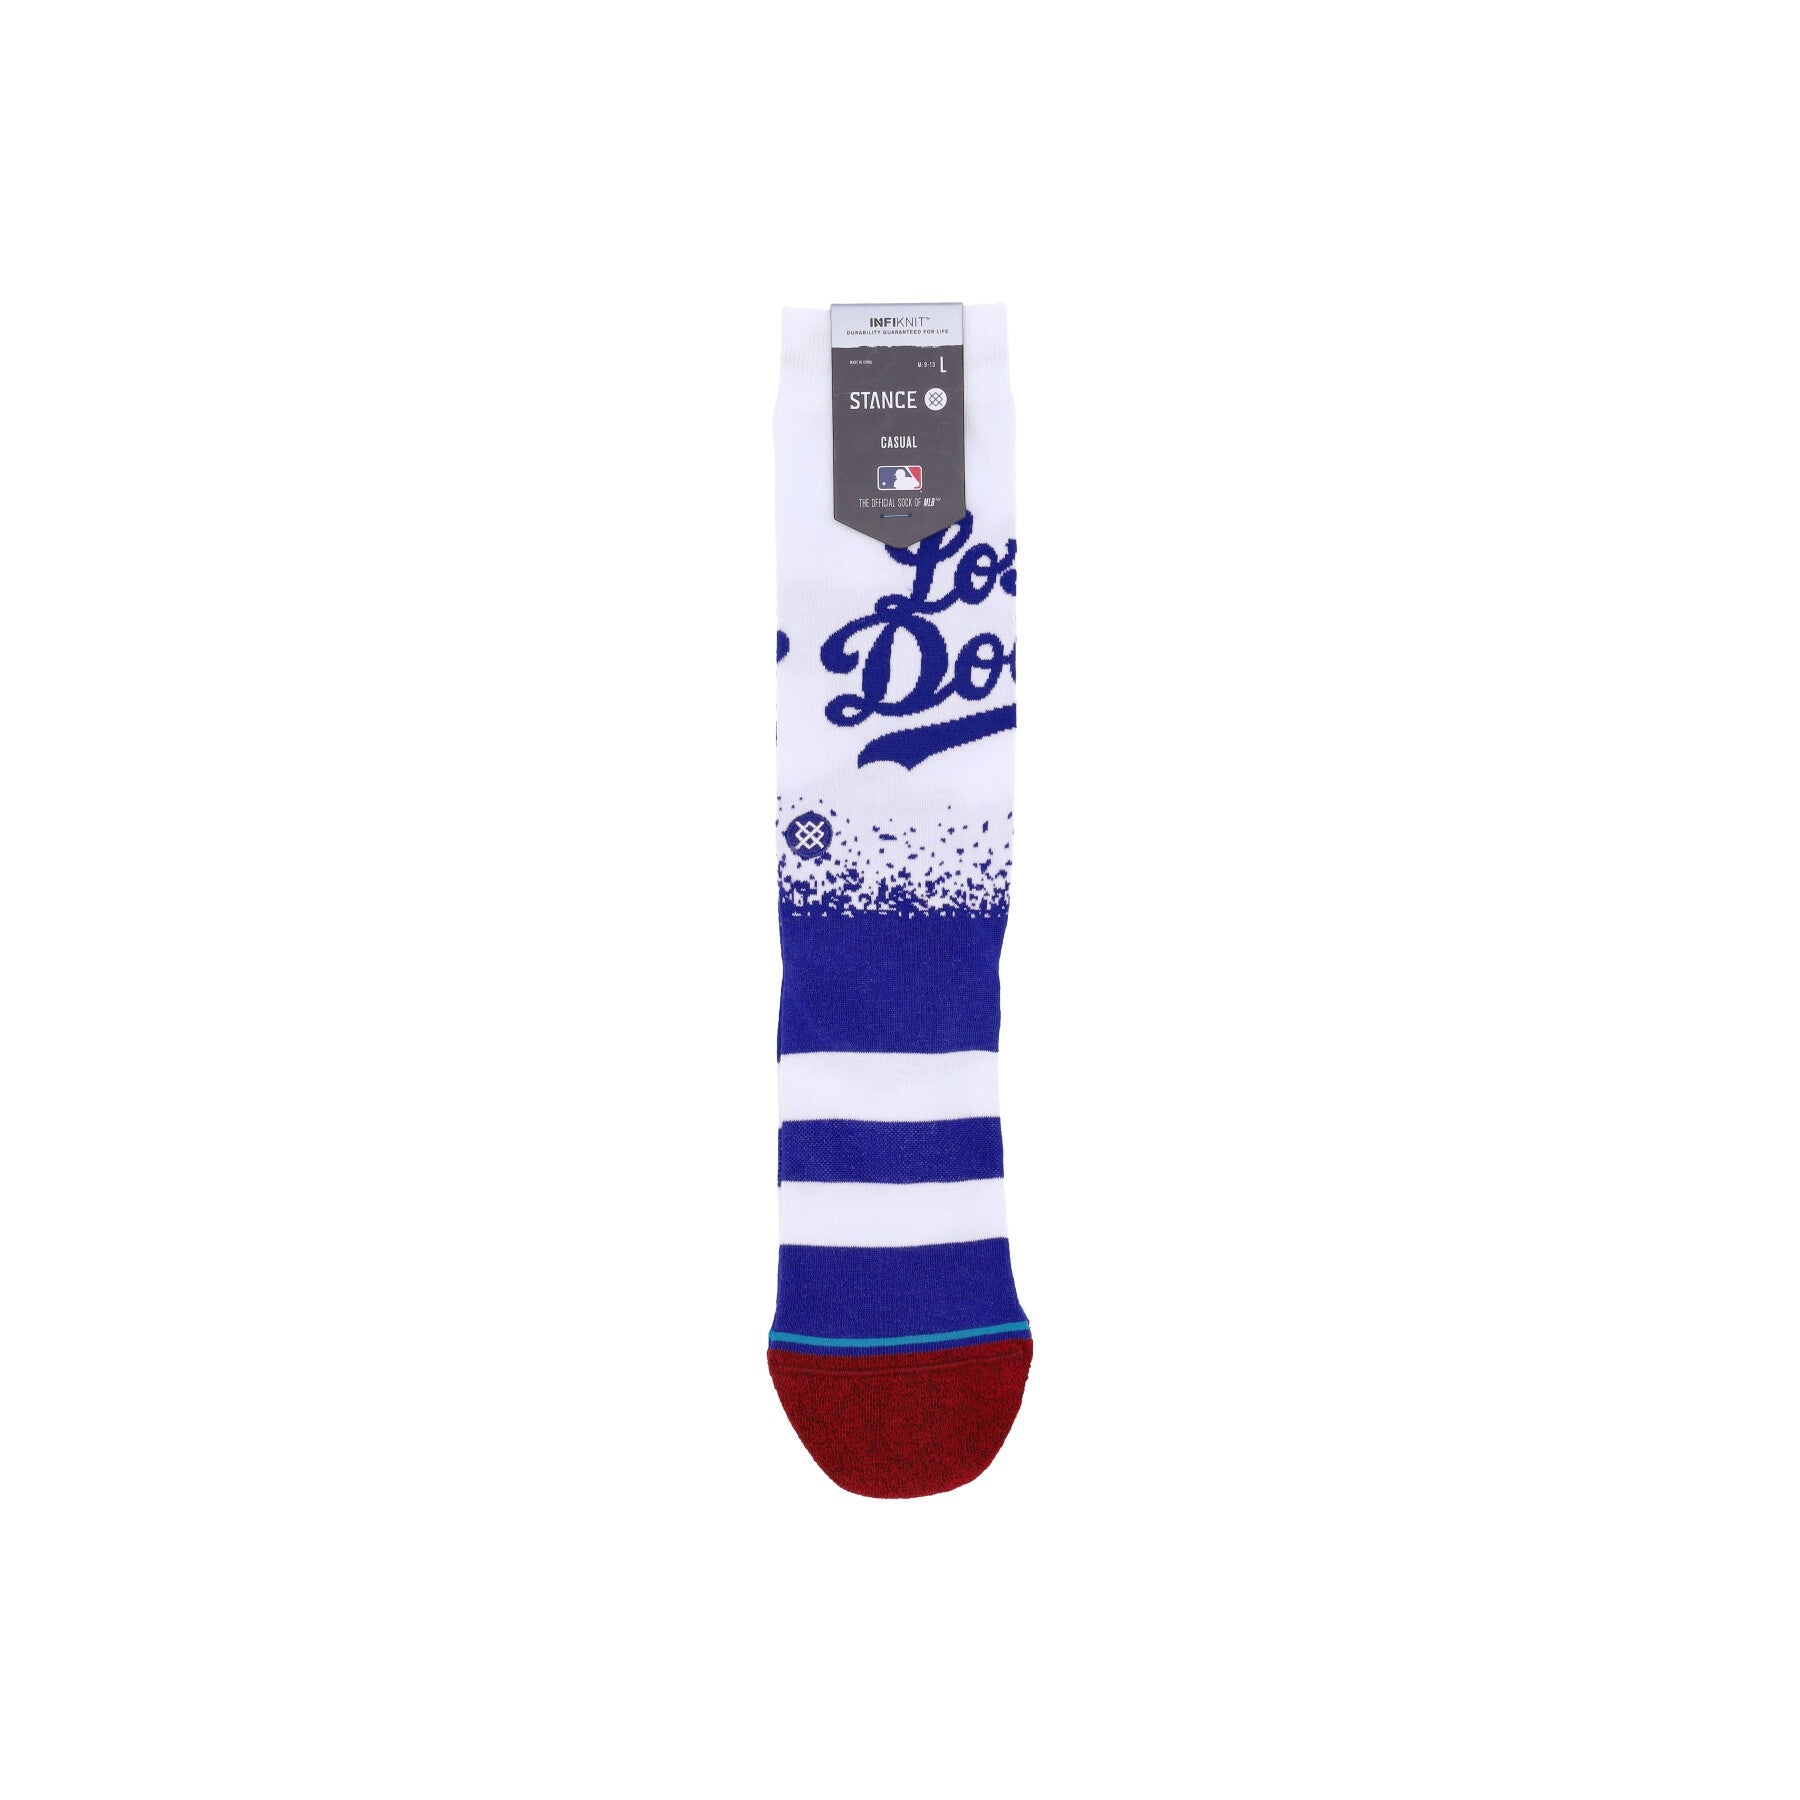 Stance, Calza Media Uomo Dodgers Connect, White